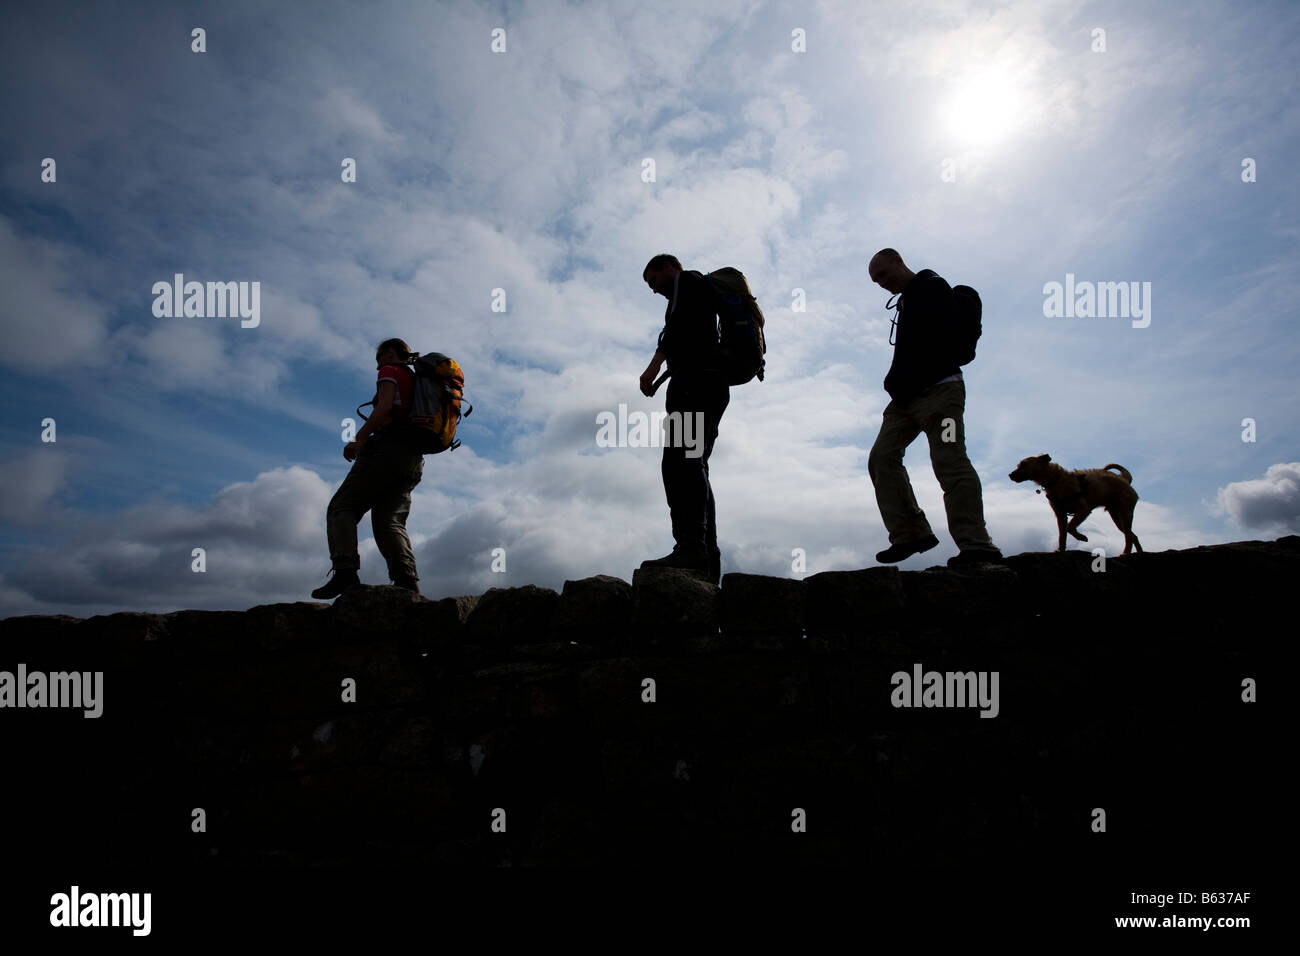 Silhouette of hikers and dog in the Mourne Mountains, County Down, Northern Ireland, UK. Stock Photo